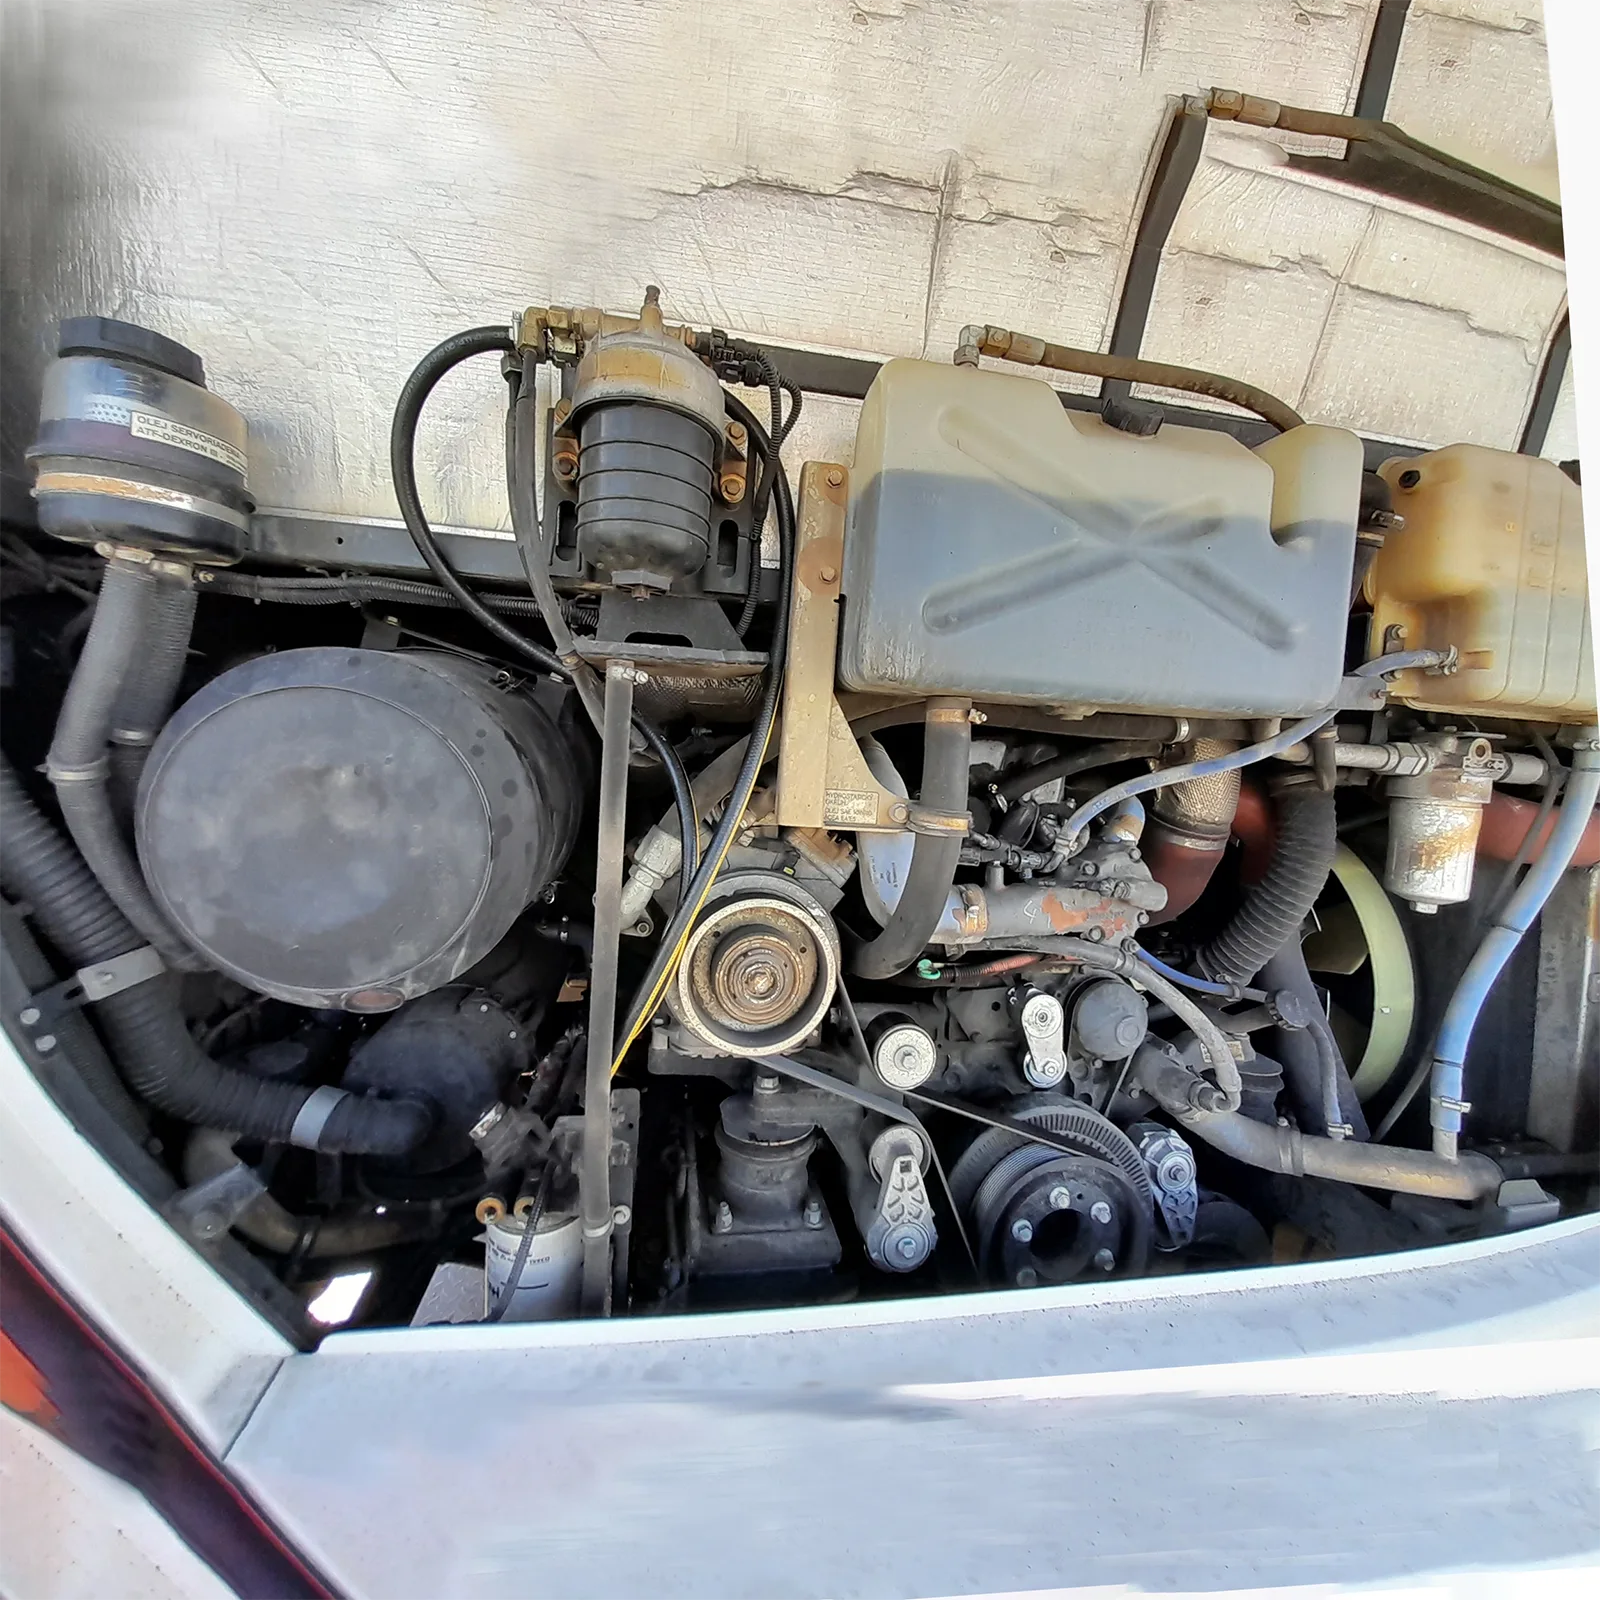 View of the fuel system located in the rear luggage compartment of the vehicle